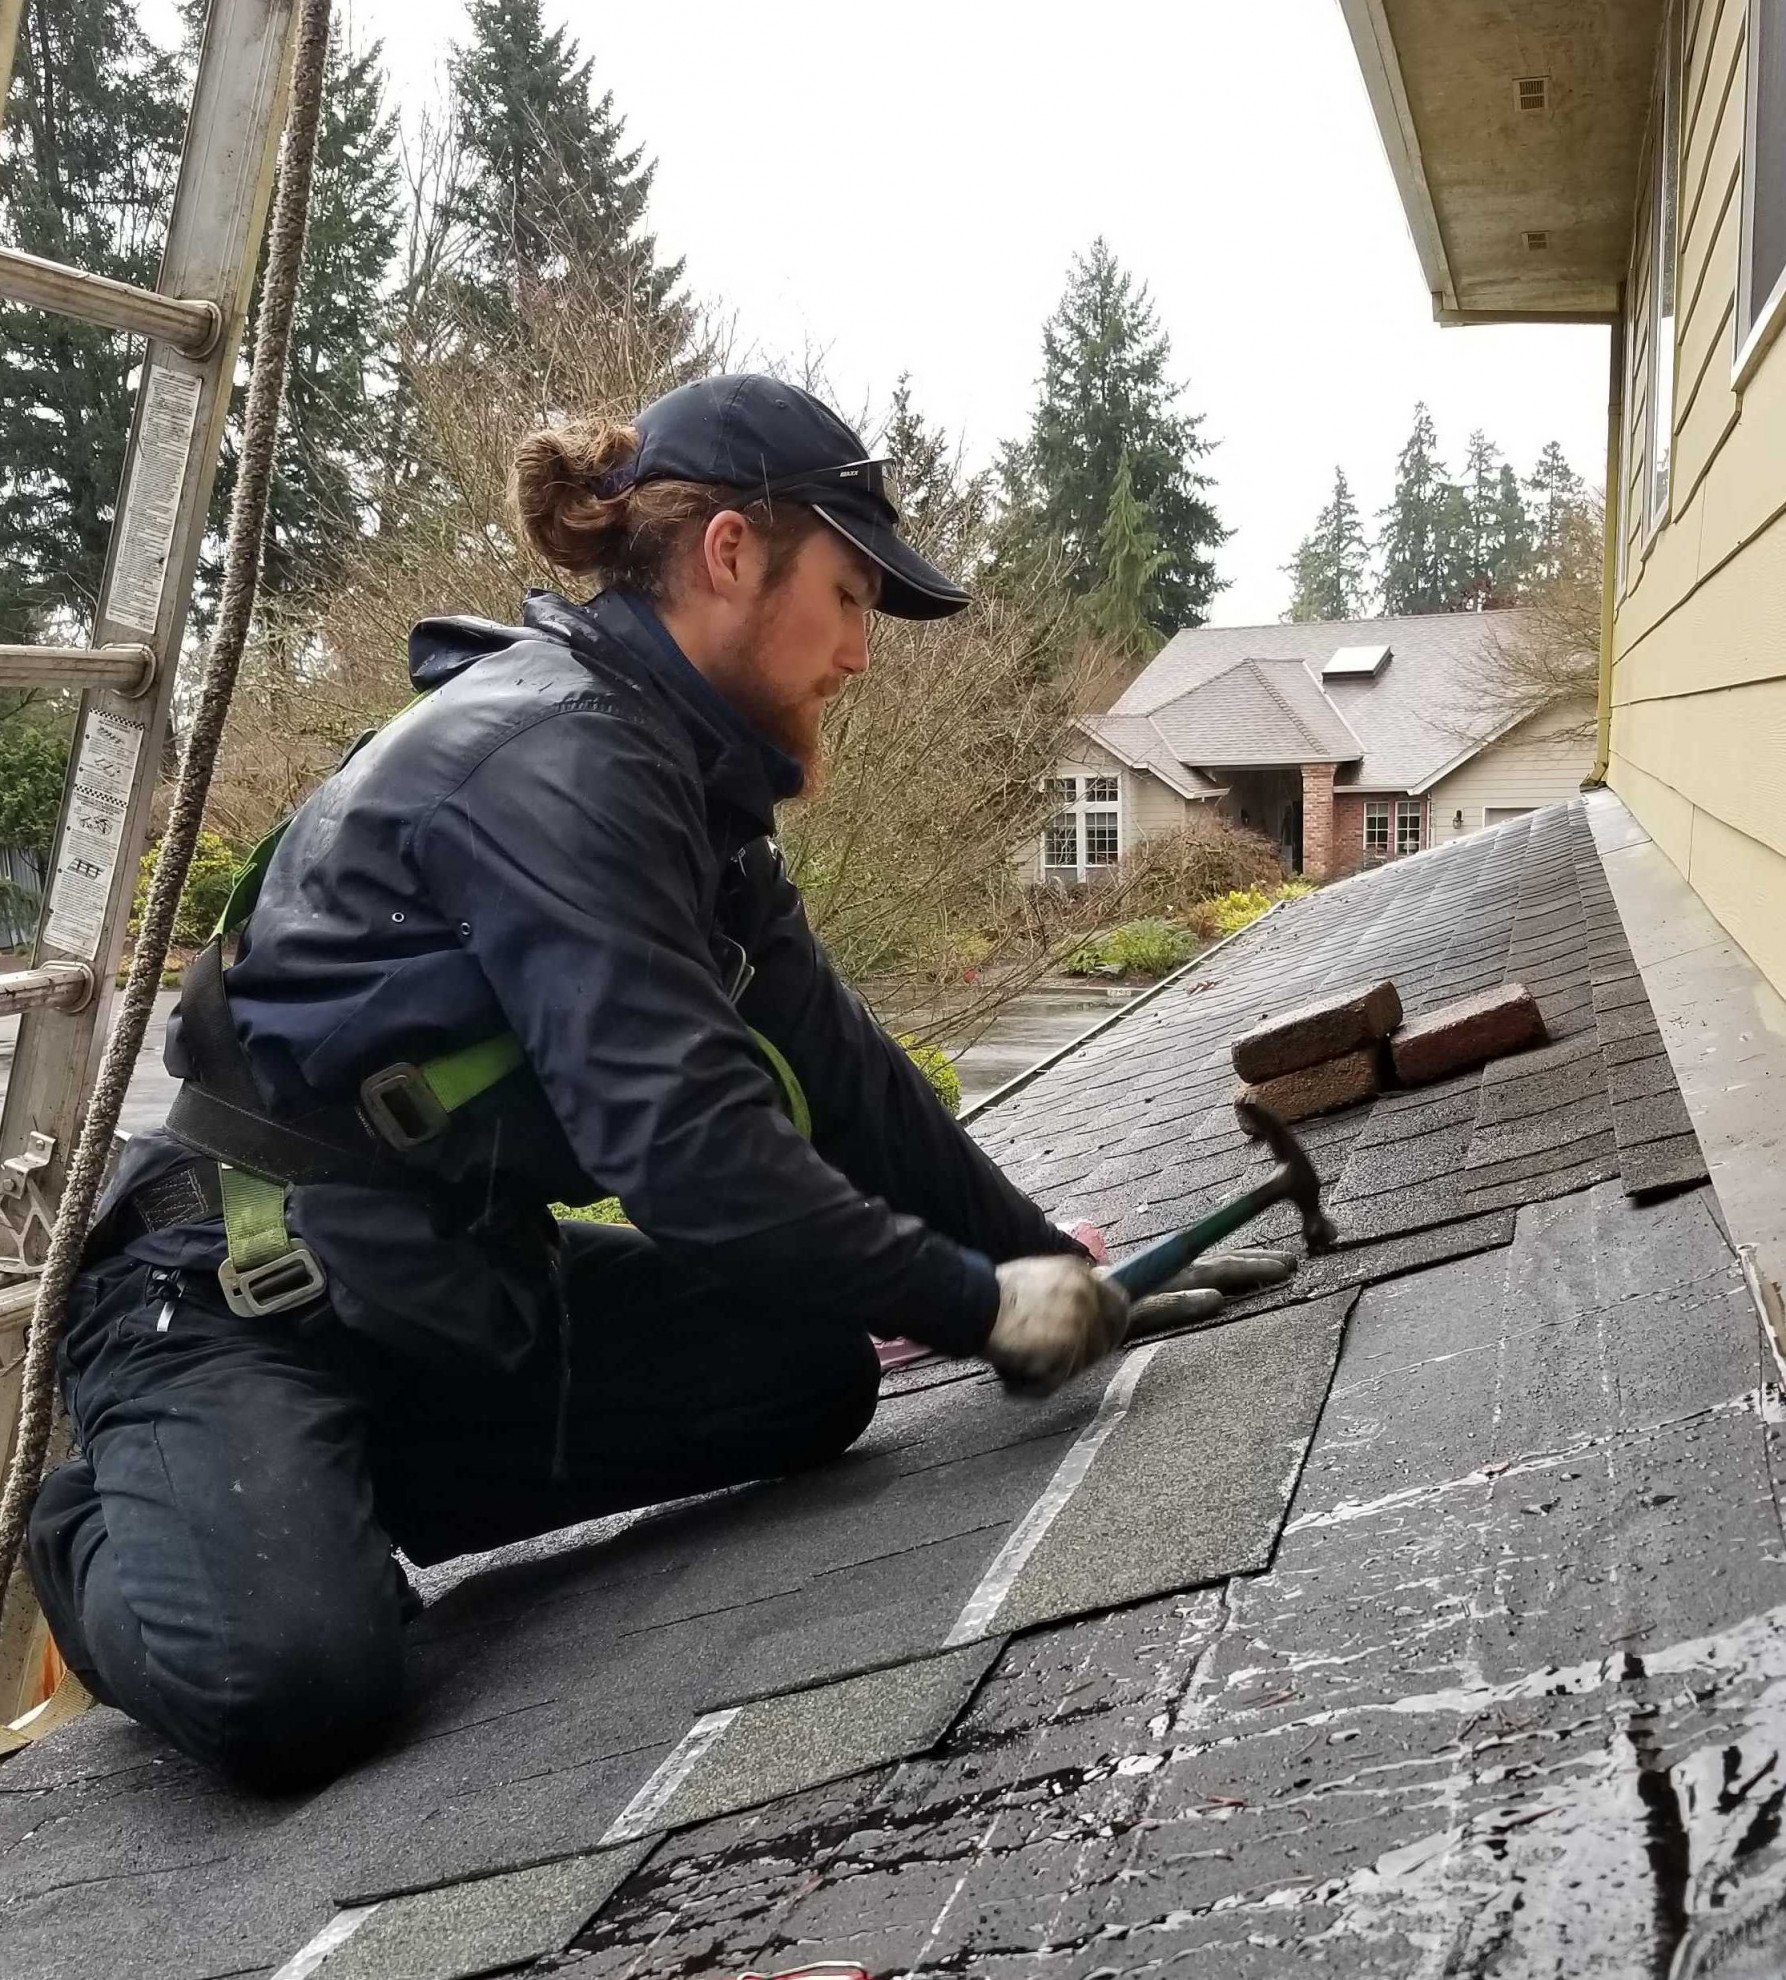 Leaky Roof Repair Service in Vancouver WA by Northwest Roof Maintenance